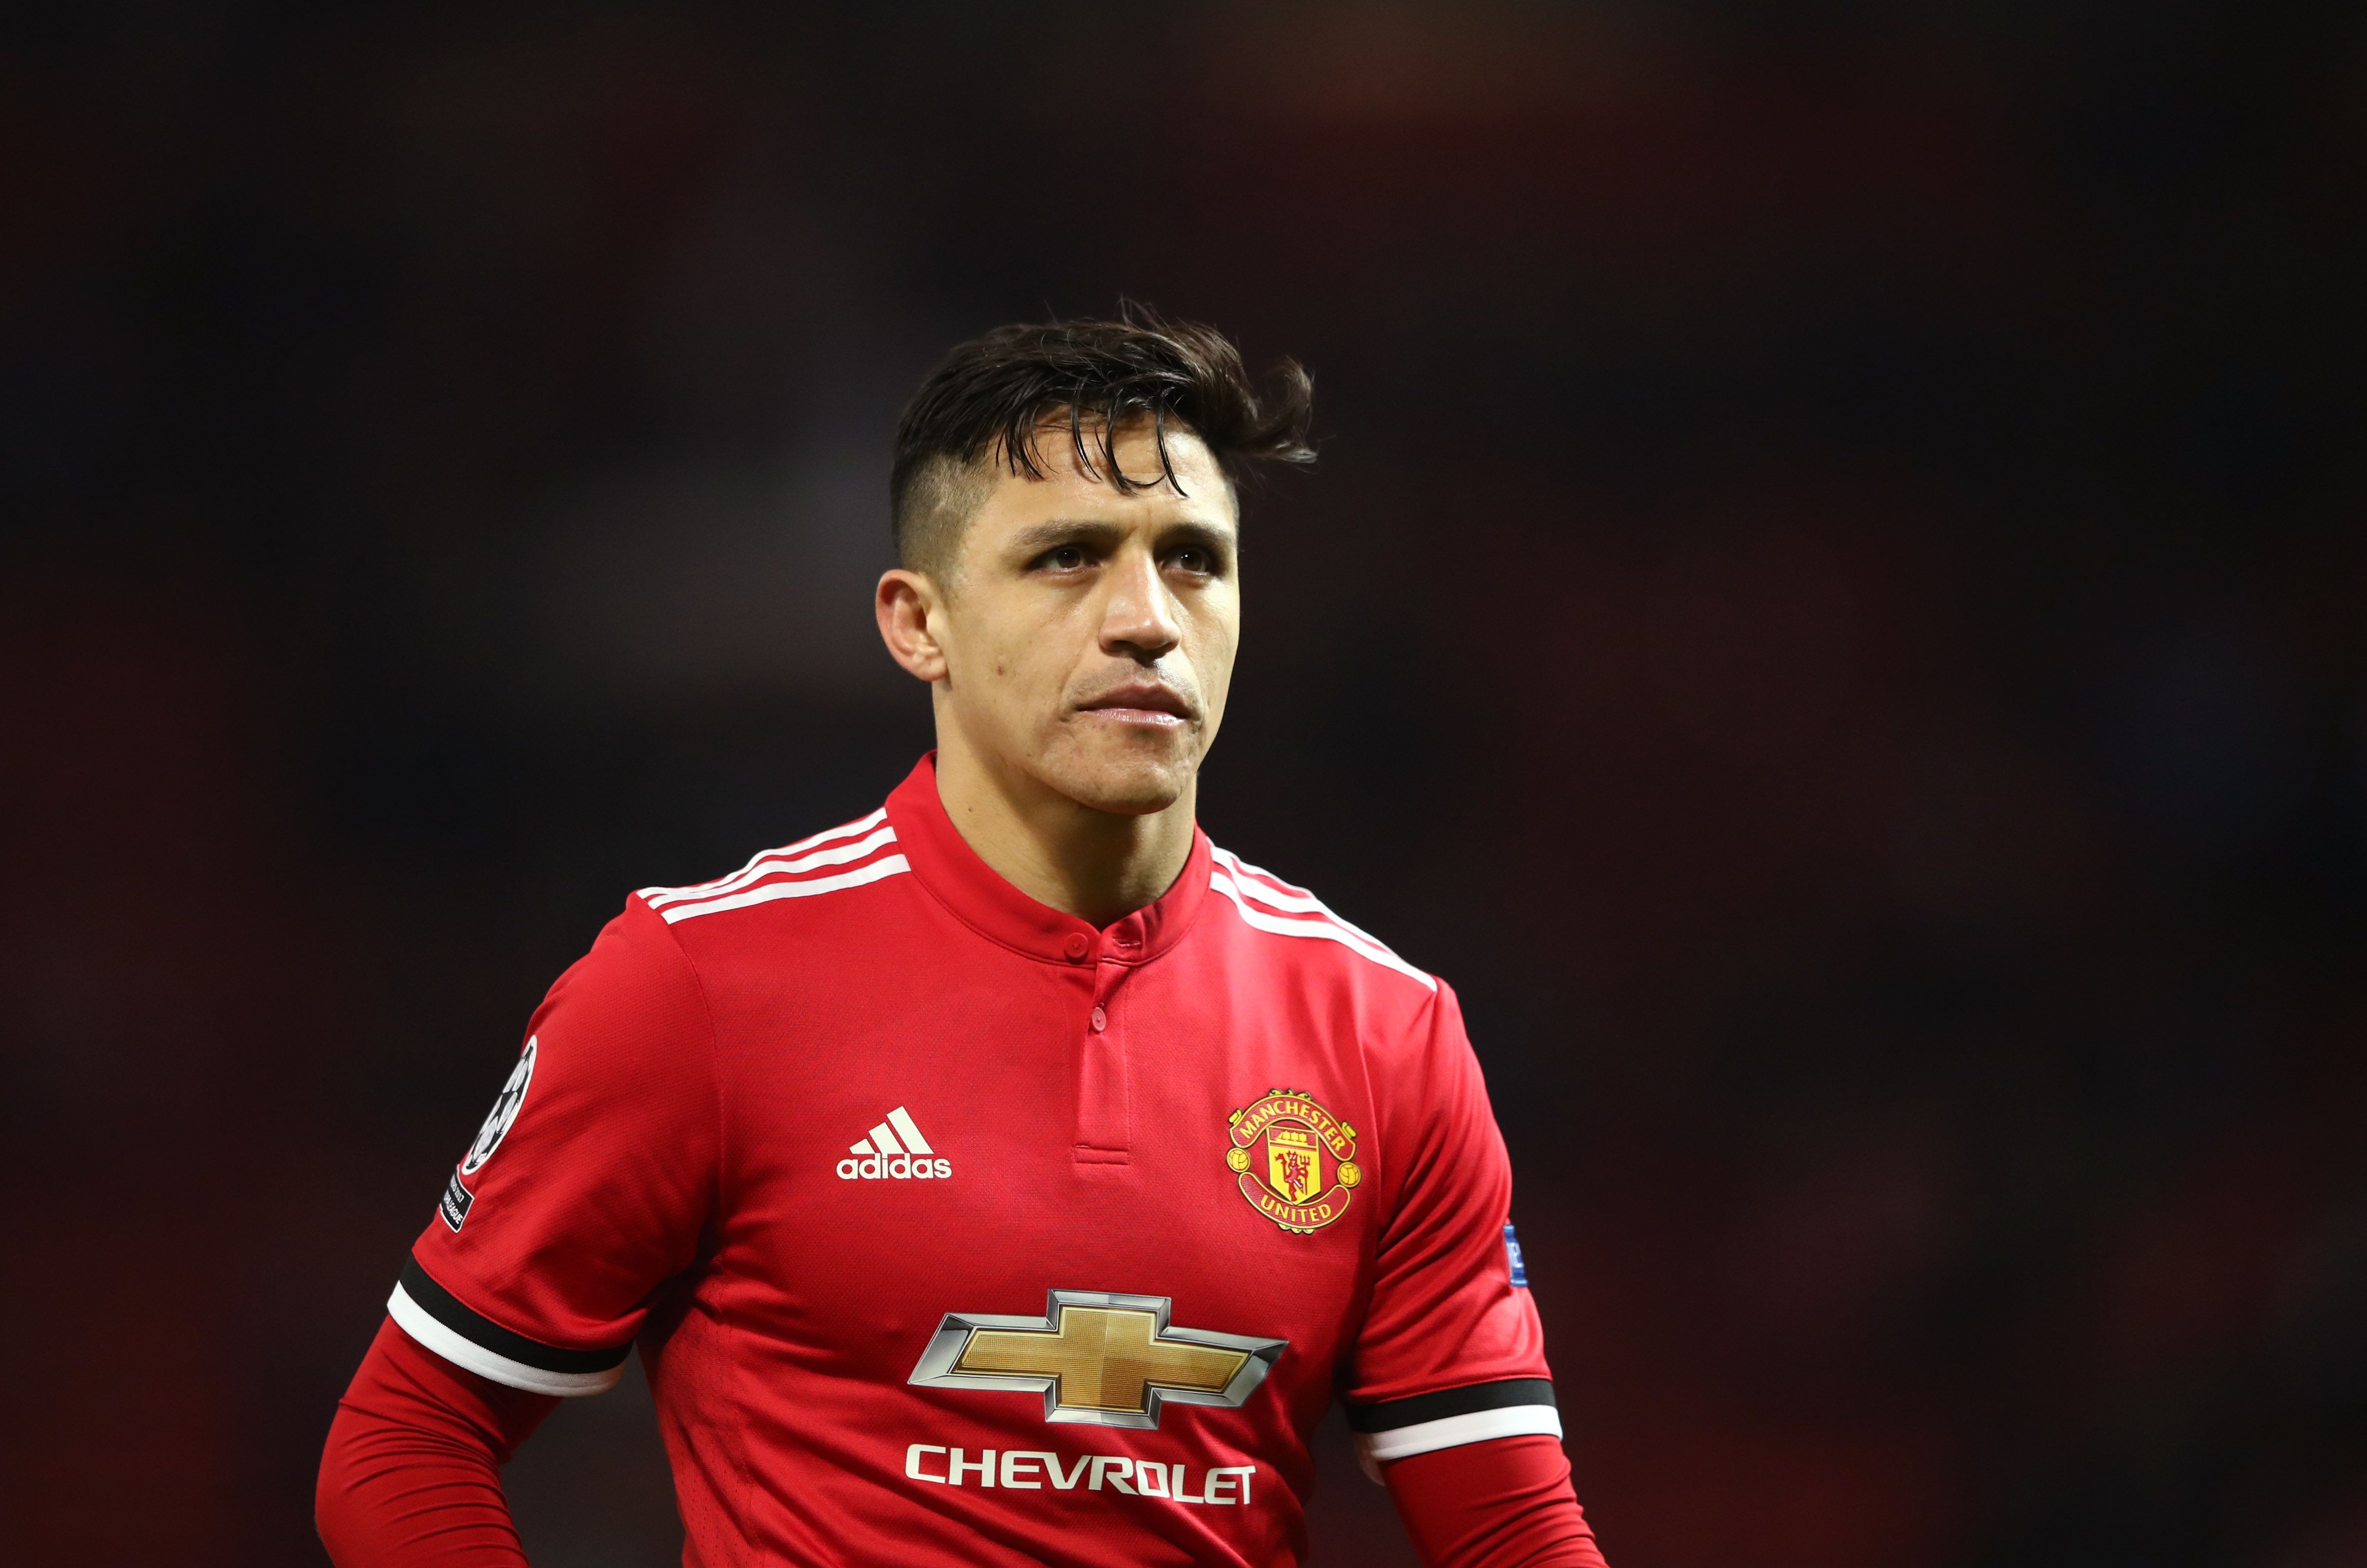 Alexis Sanchez looks disappointed while playing for Man United